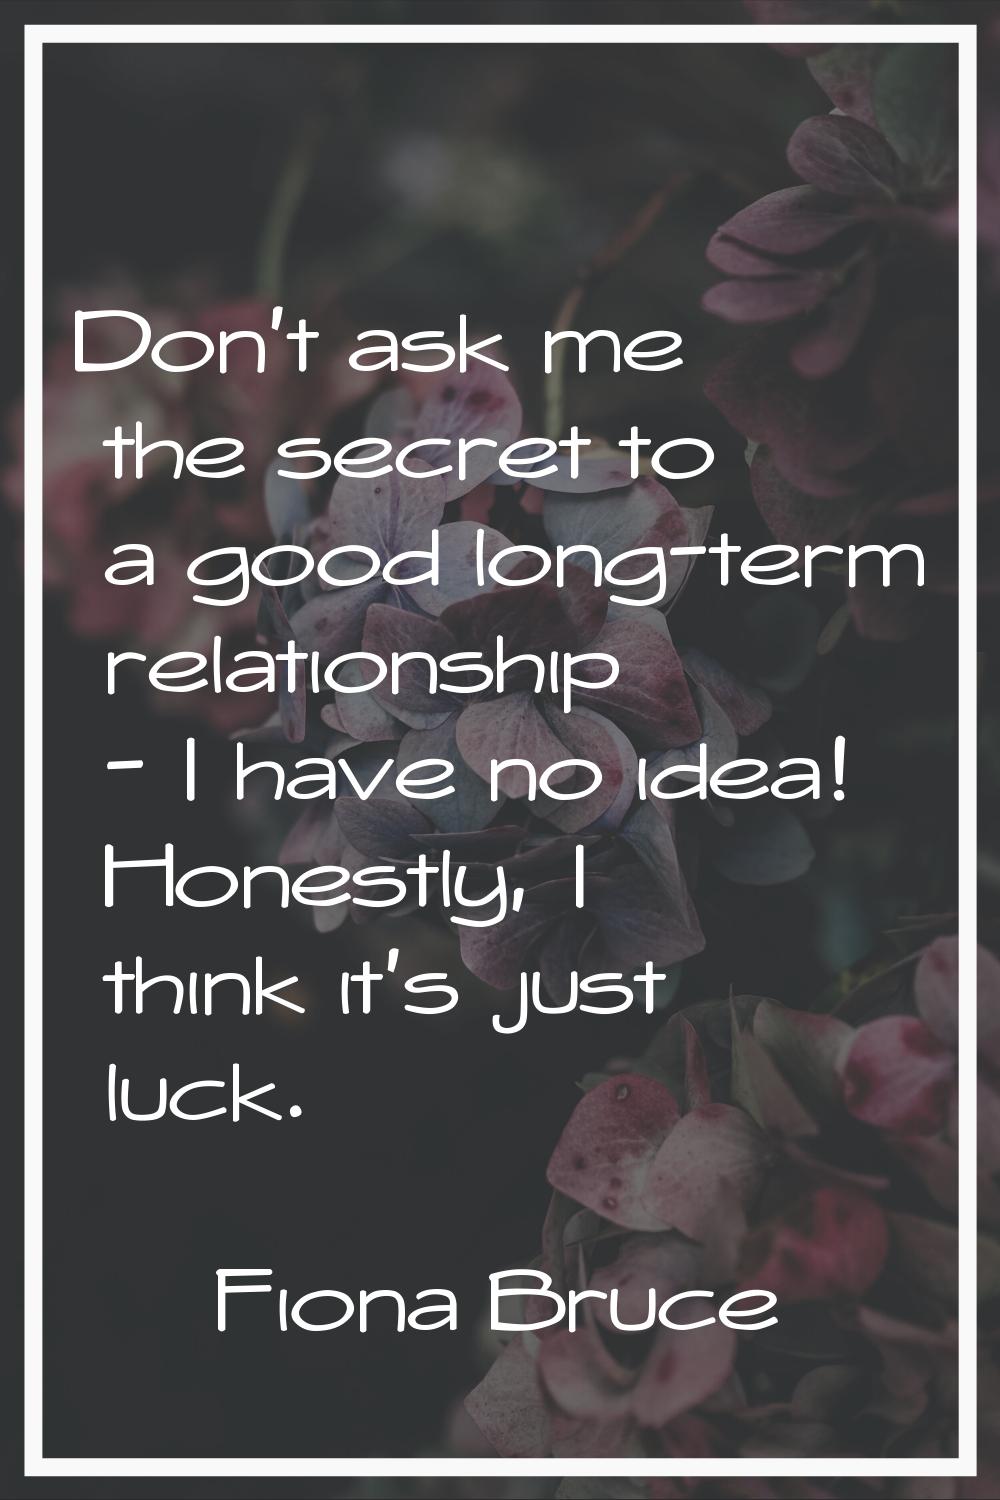 Don't ask me the secret to a good long-term relationship - I have no idea! Honestly, I think it's j